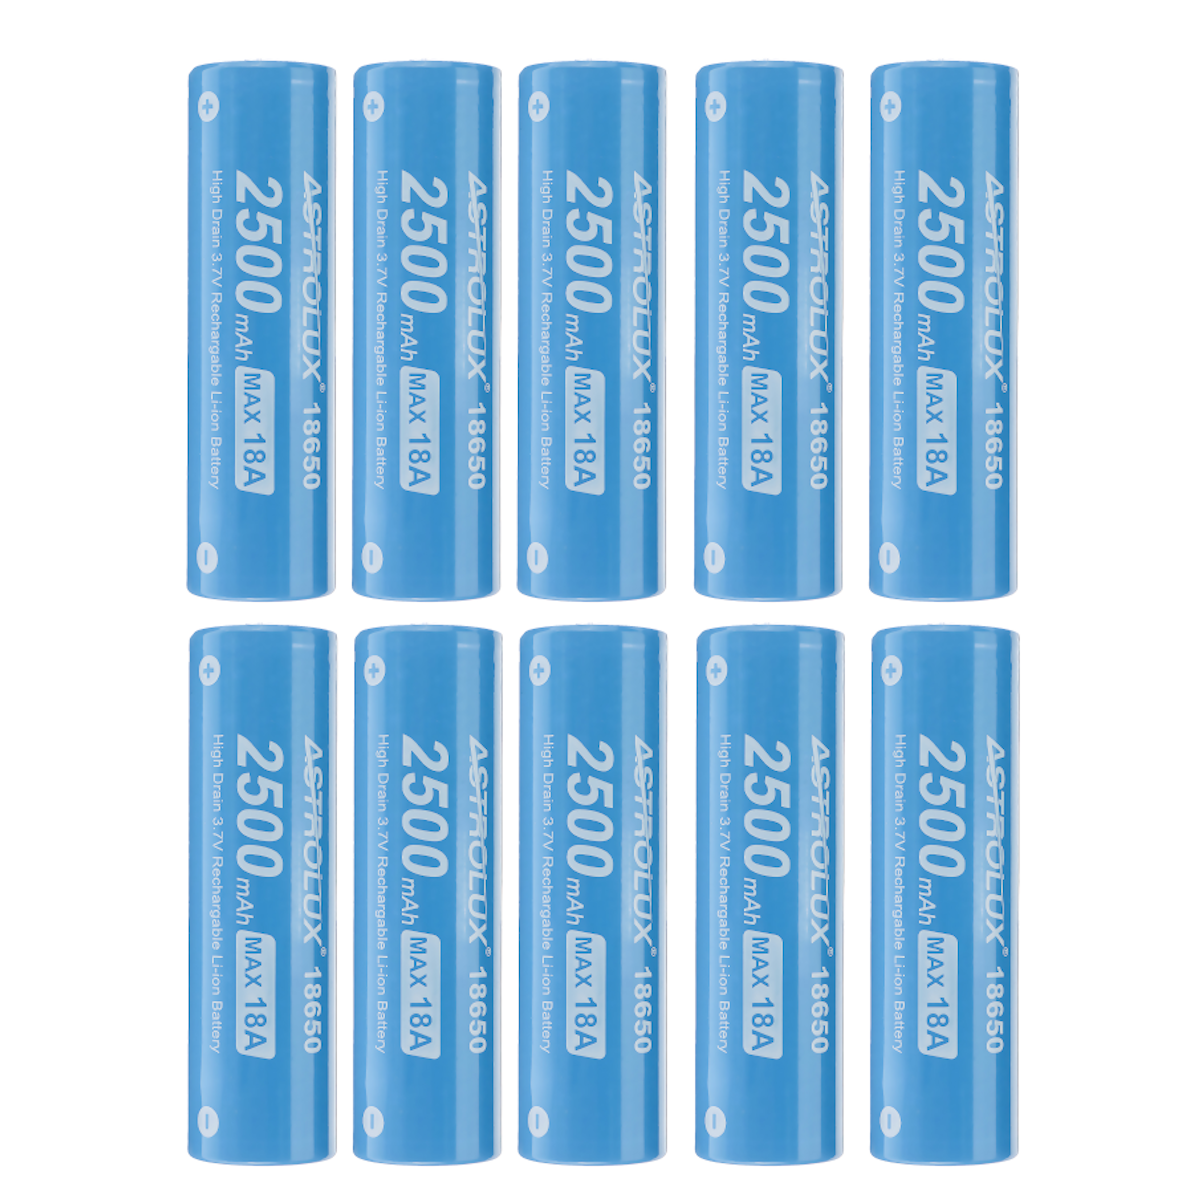 10Pcs Astrolux® E1825 18A 2500mAh 3.7V 18650 Li-ion Battery Unprotected High Drain Rechargeable Lithium Power Cell For Astrolux Nitecore Lumintop Fenix Olight Flashlights RC Toys Home Tools